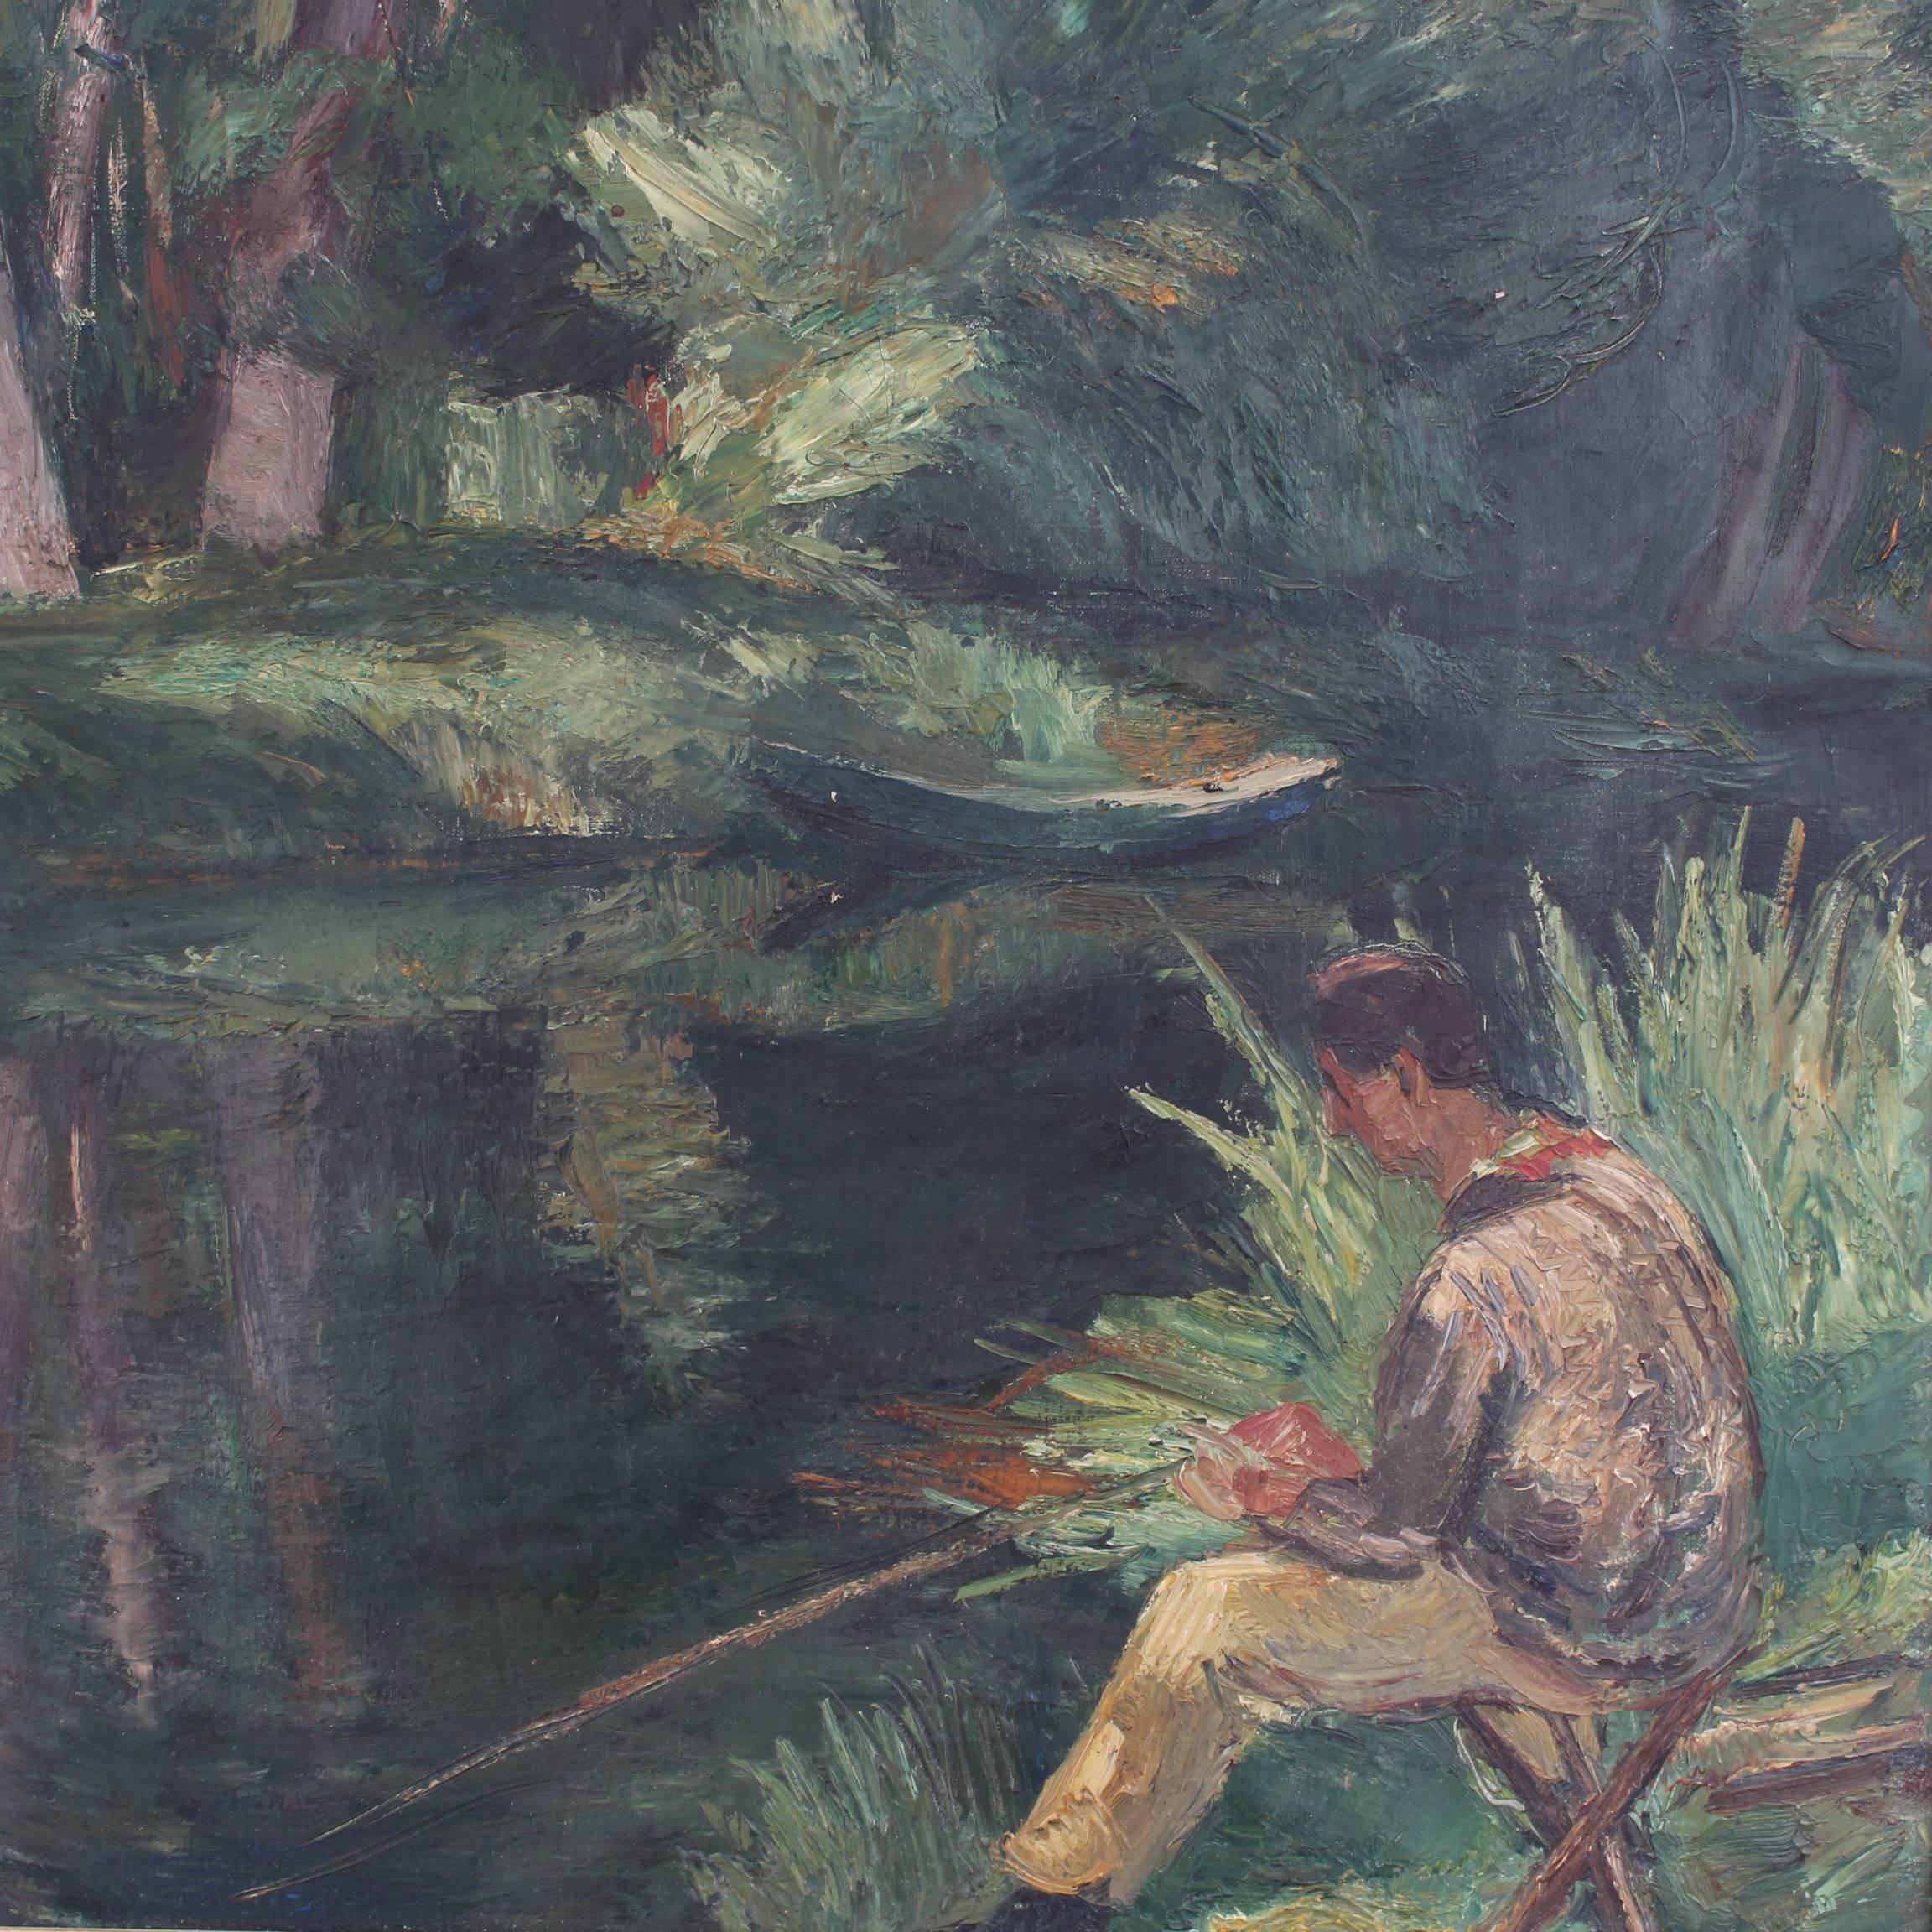 The Fisherman - Expressionist Painting by Charles Kvapil